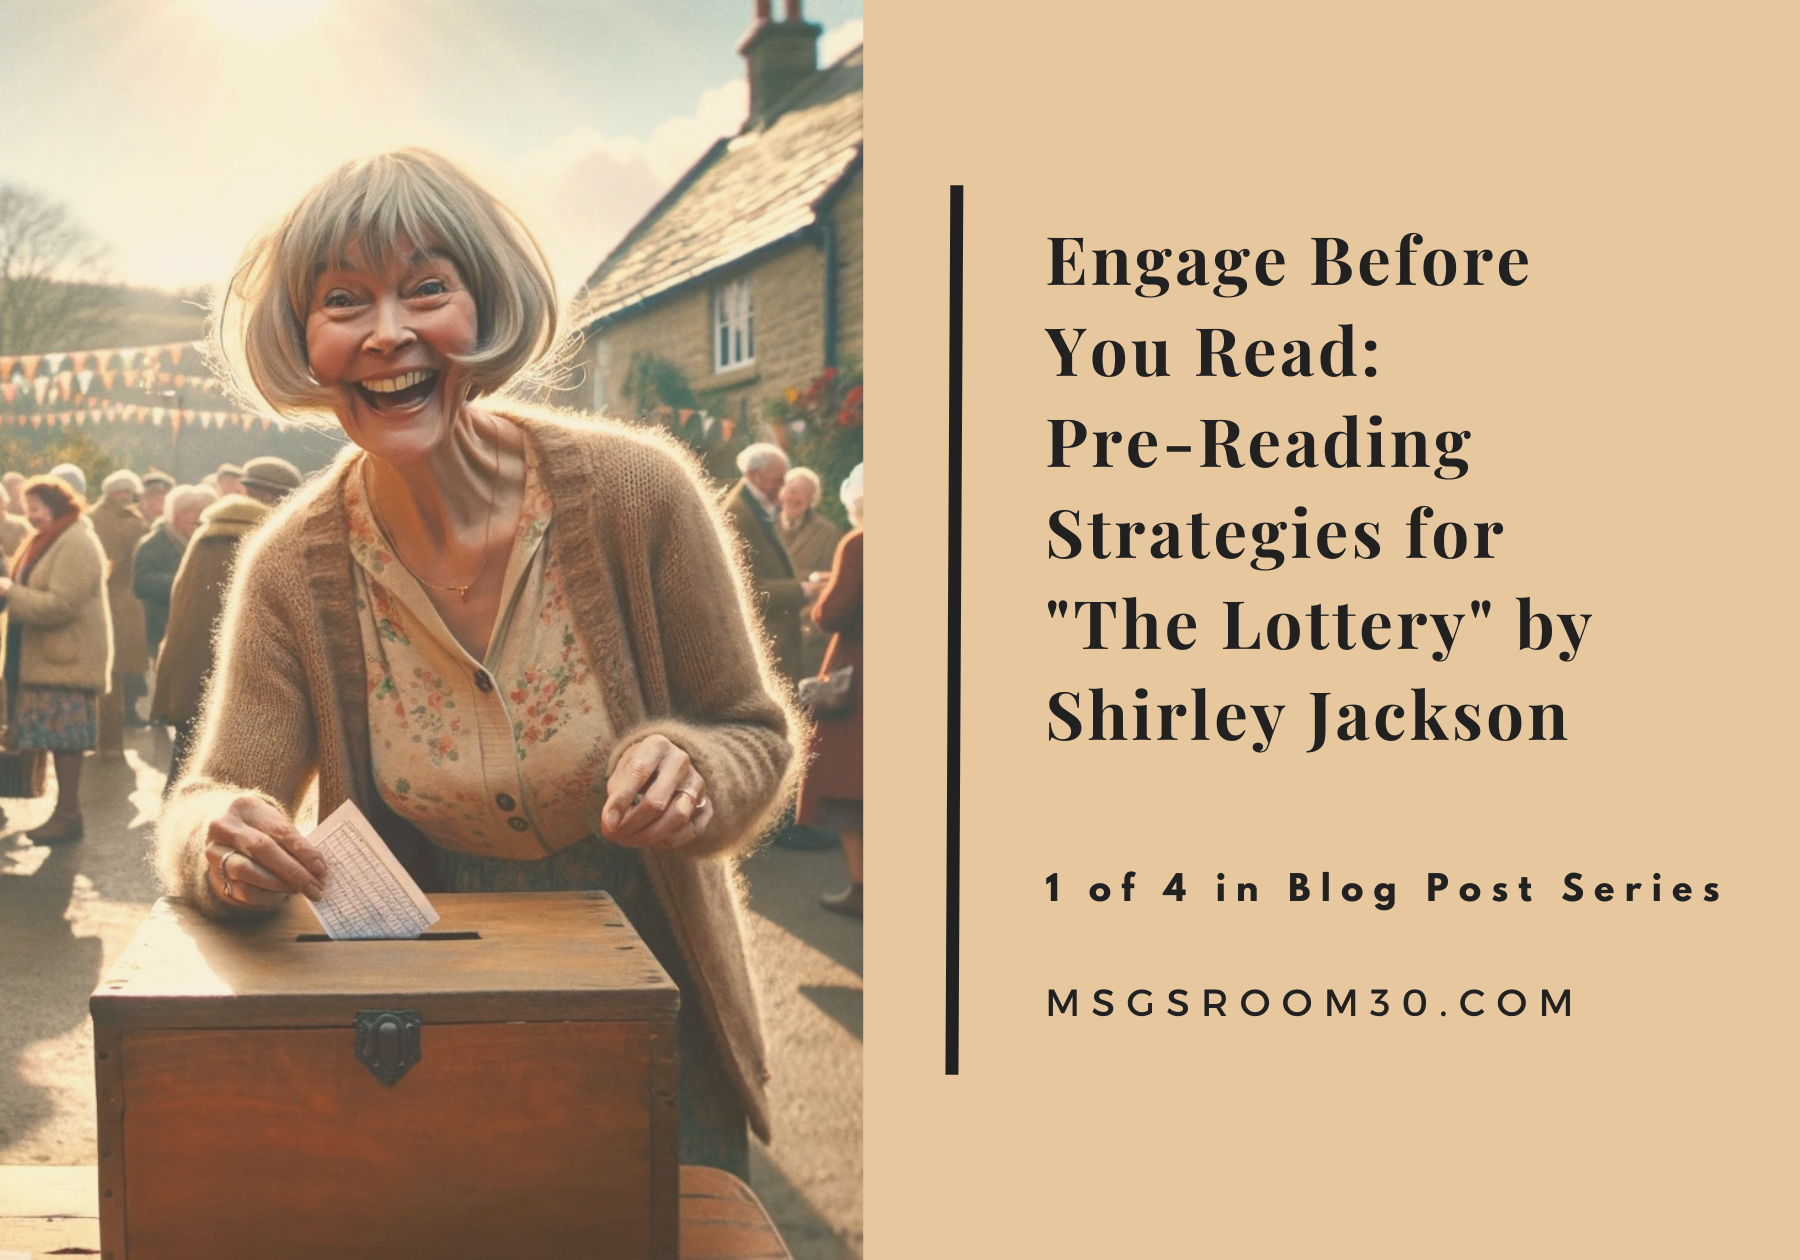 Engage Before You Read: Pre-Reading Strategies for “The Lottery” by Shirley Jackson